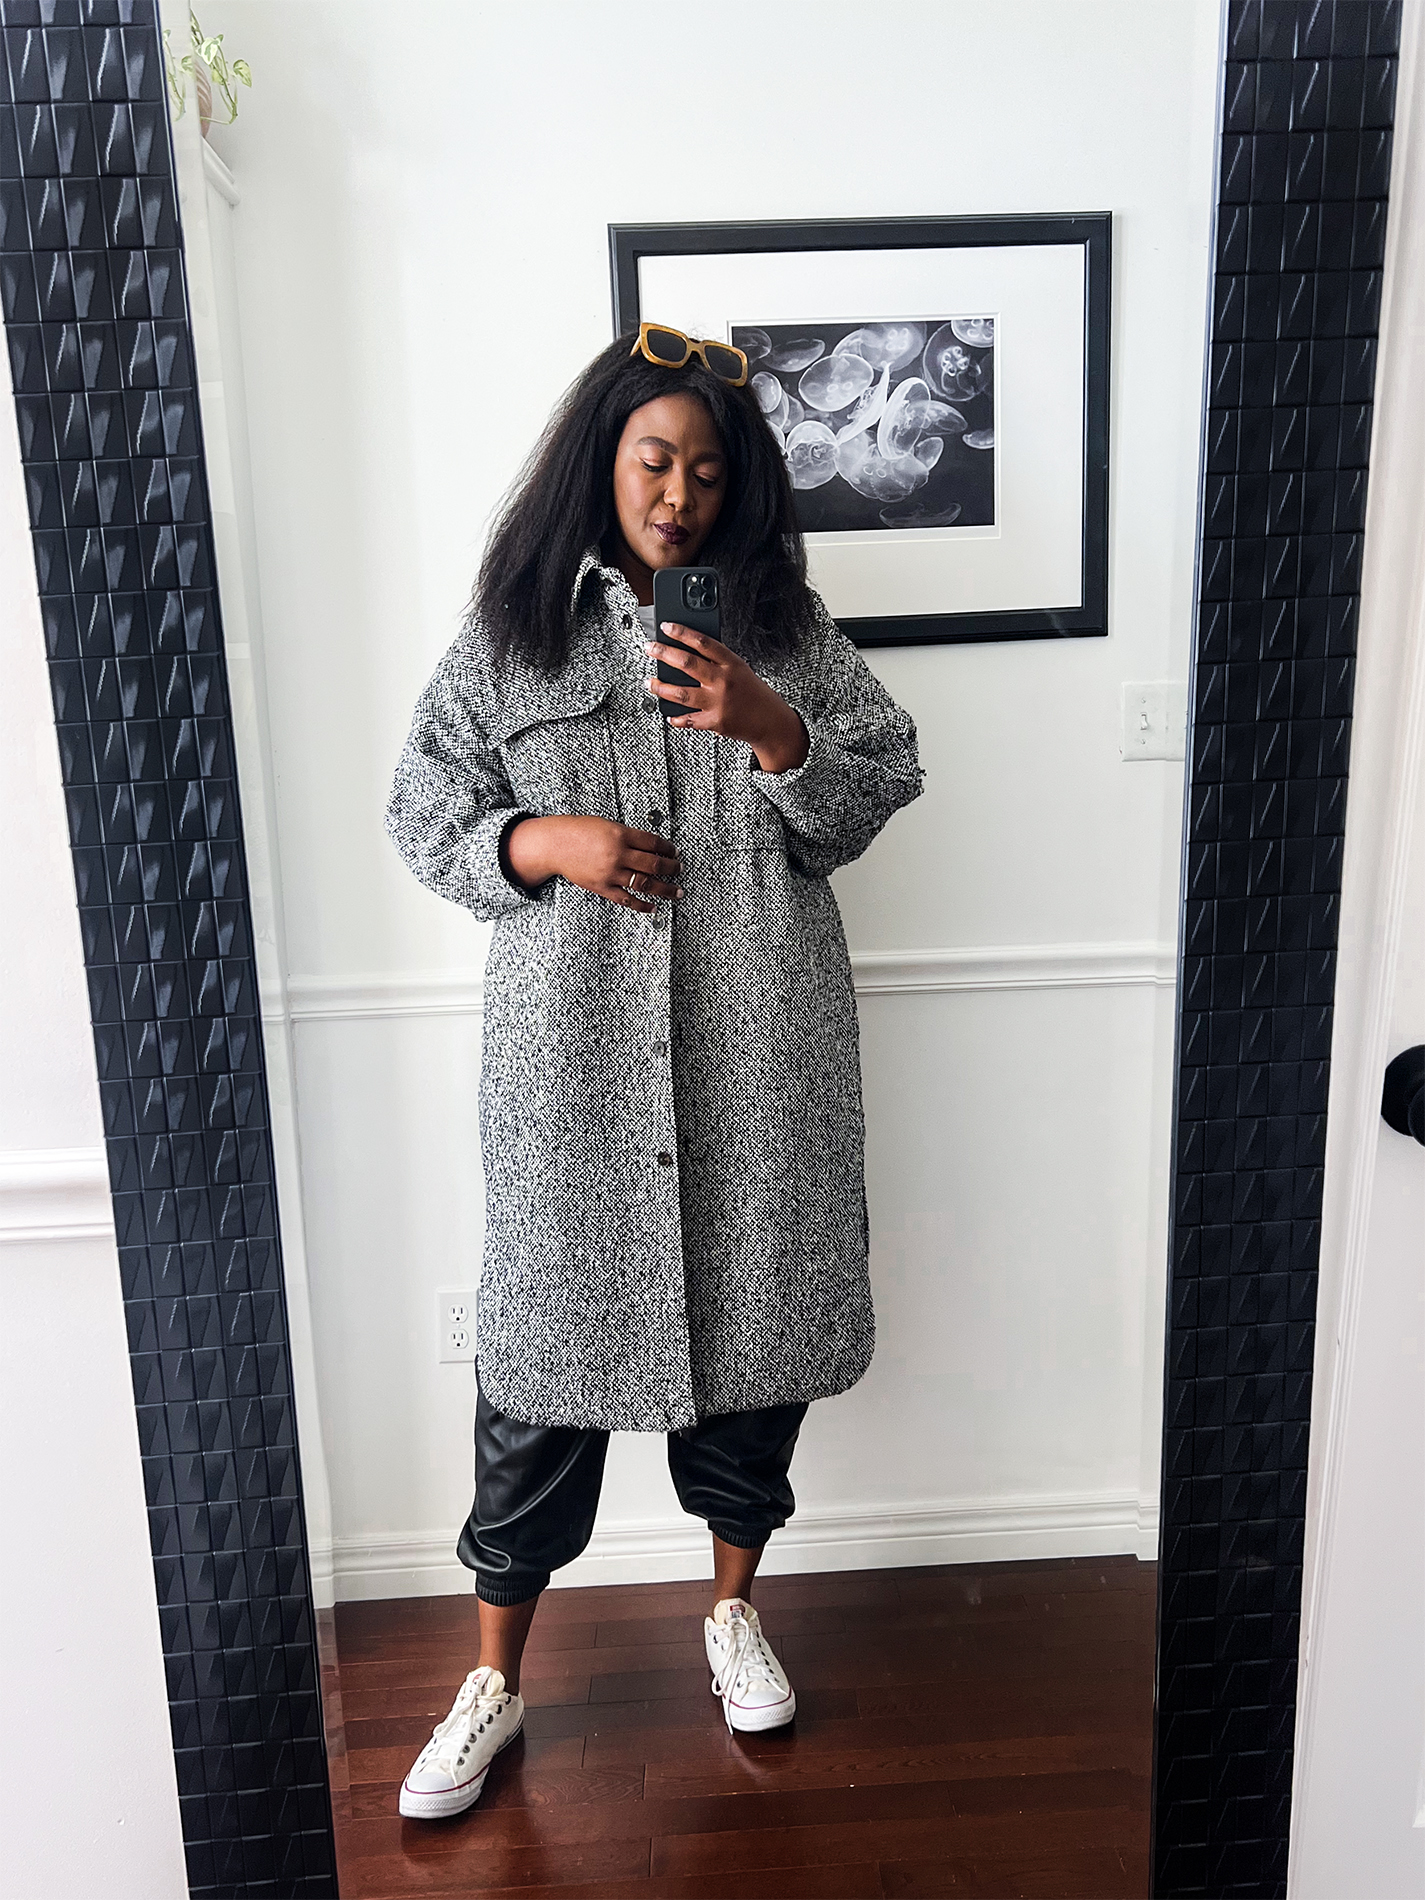 How to Style a Shacket if You are Curvy